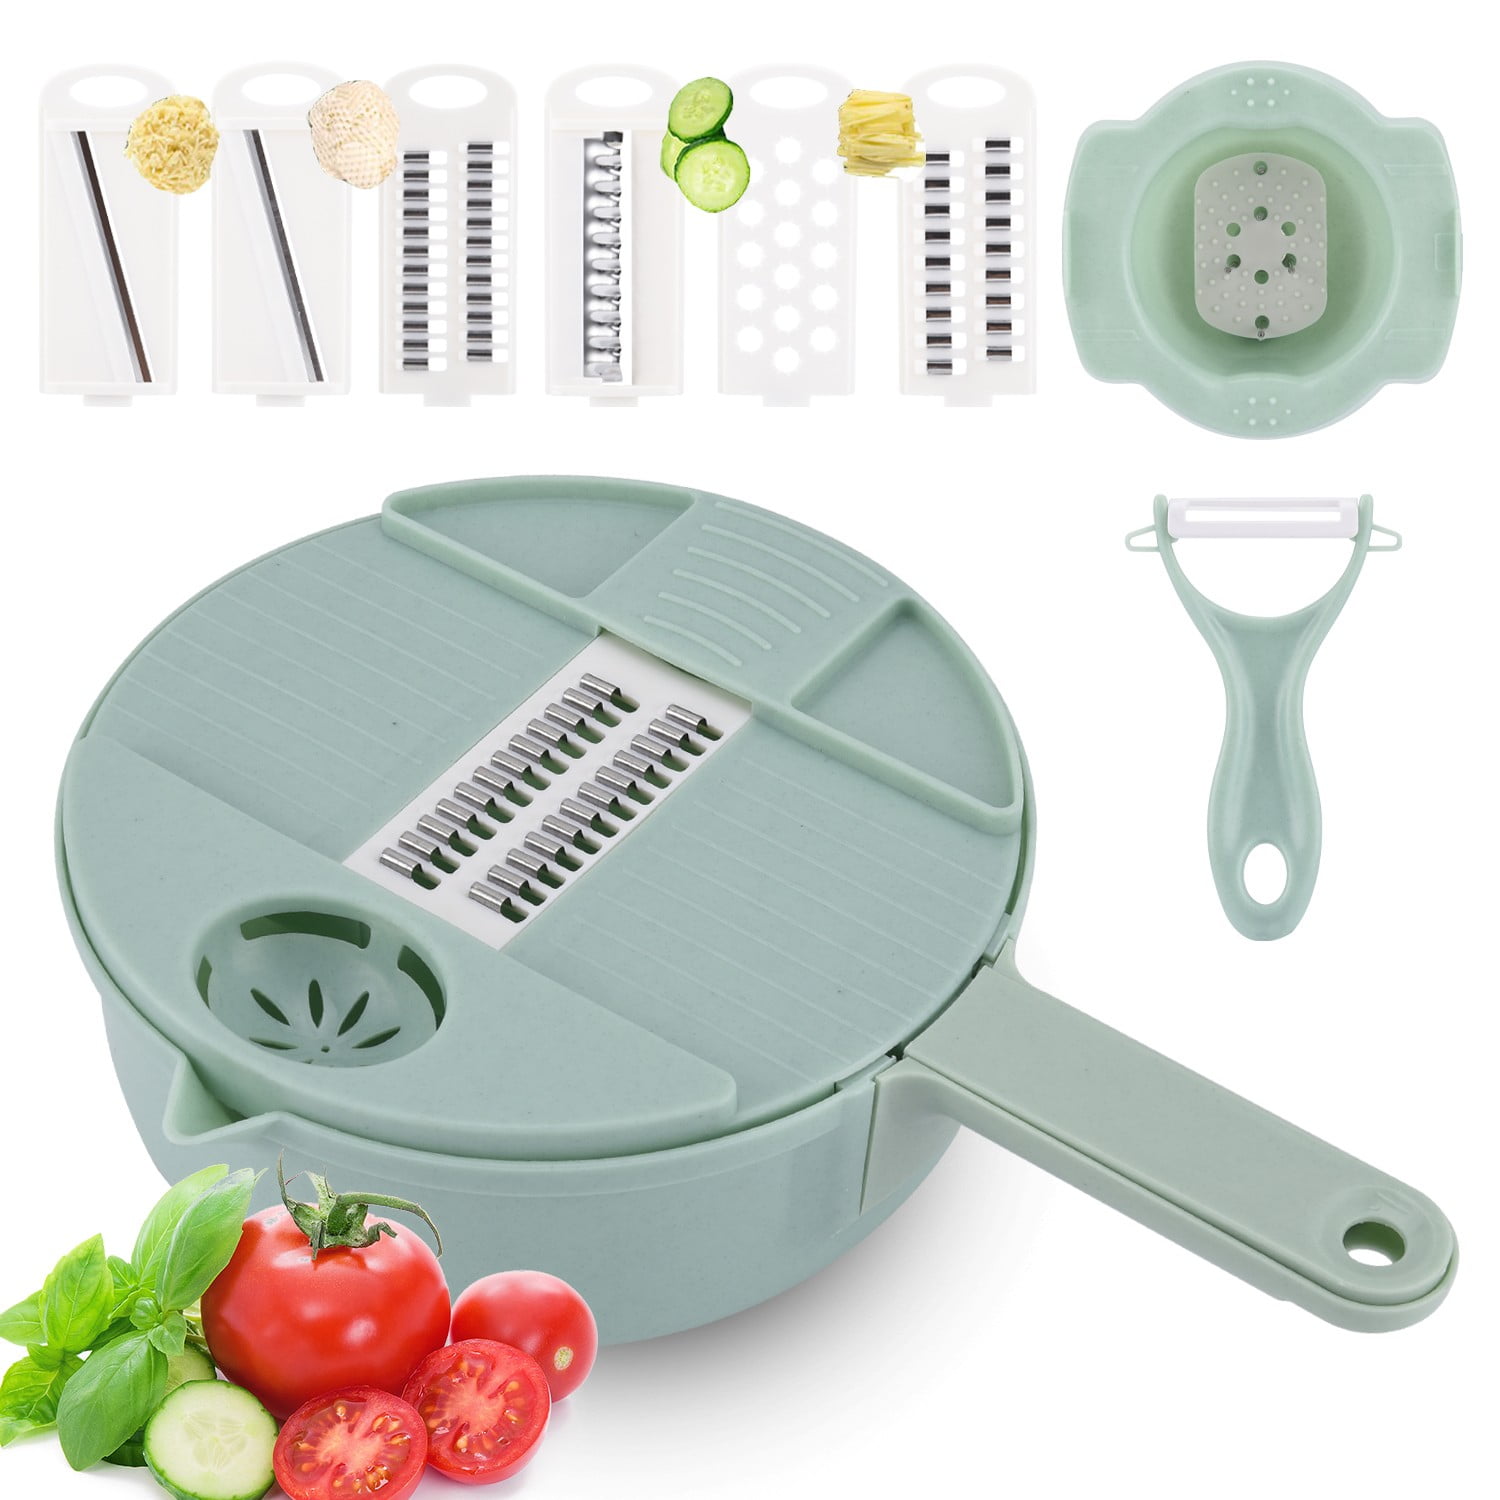 Vegetable Chopper Dicer - 12-in-1 SuperSlicer Pro: Stainless Steel Blades, Various Cuts, Peeler, Safety Lock, Non-Slip Base, Compact, Easy Store